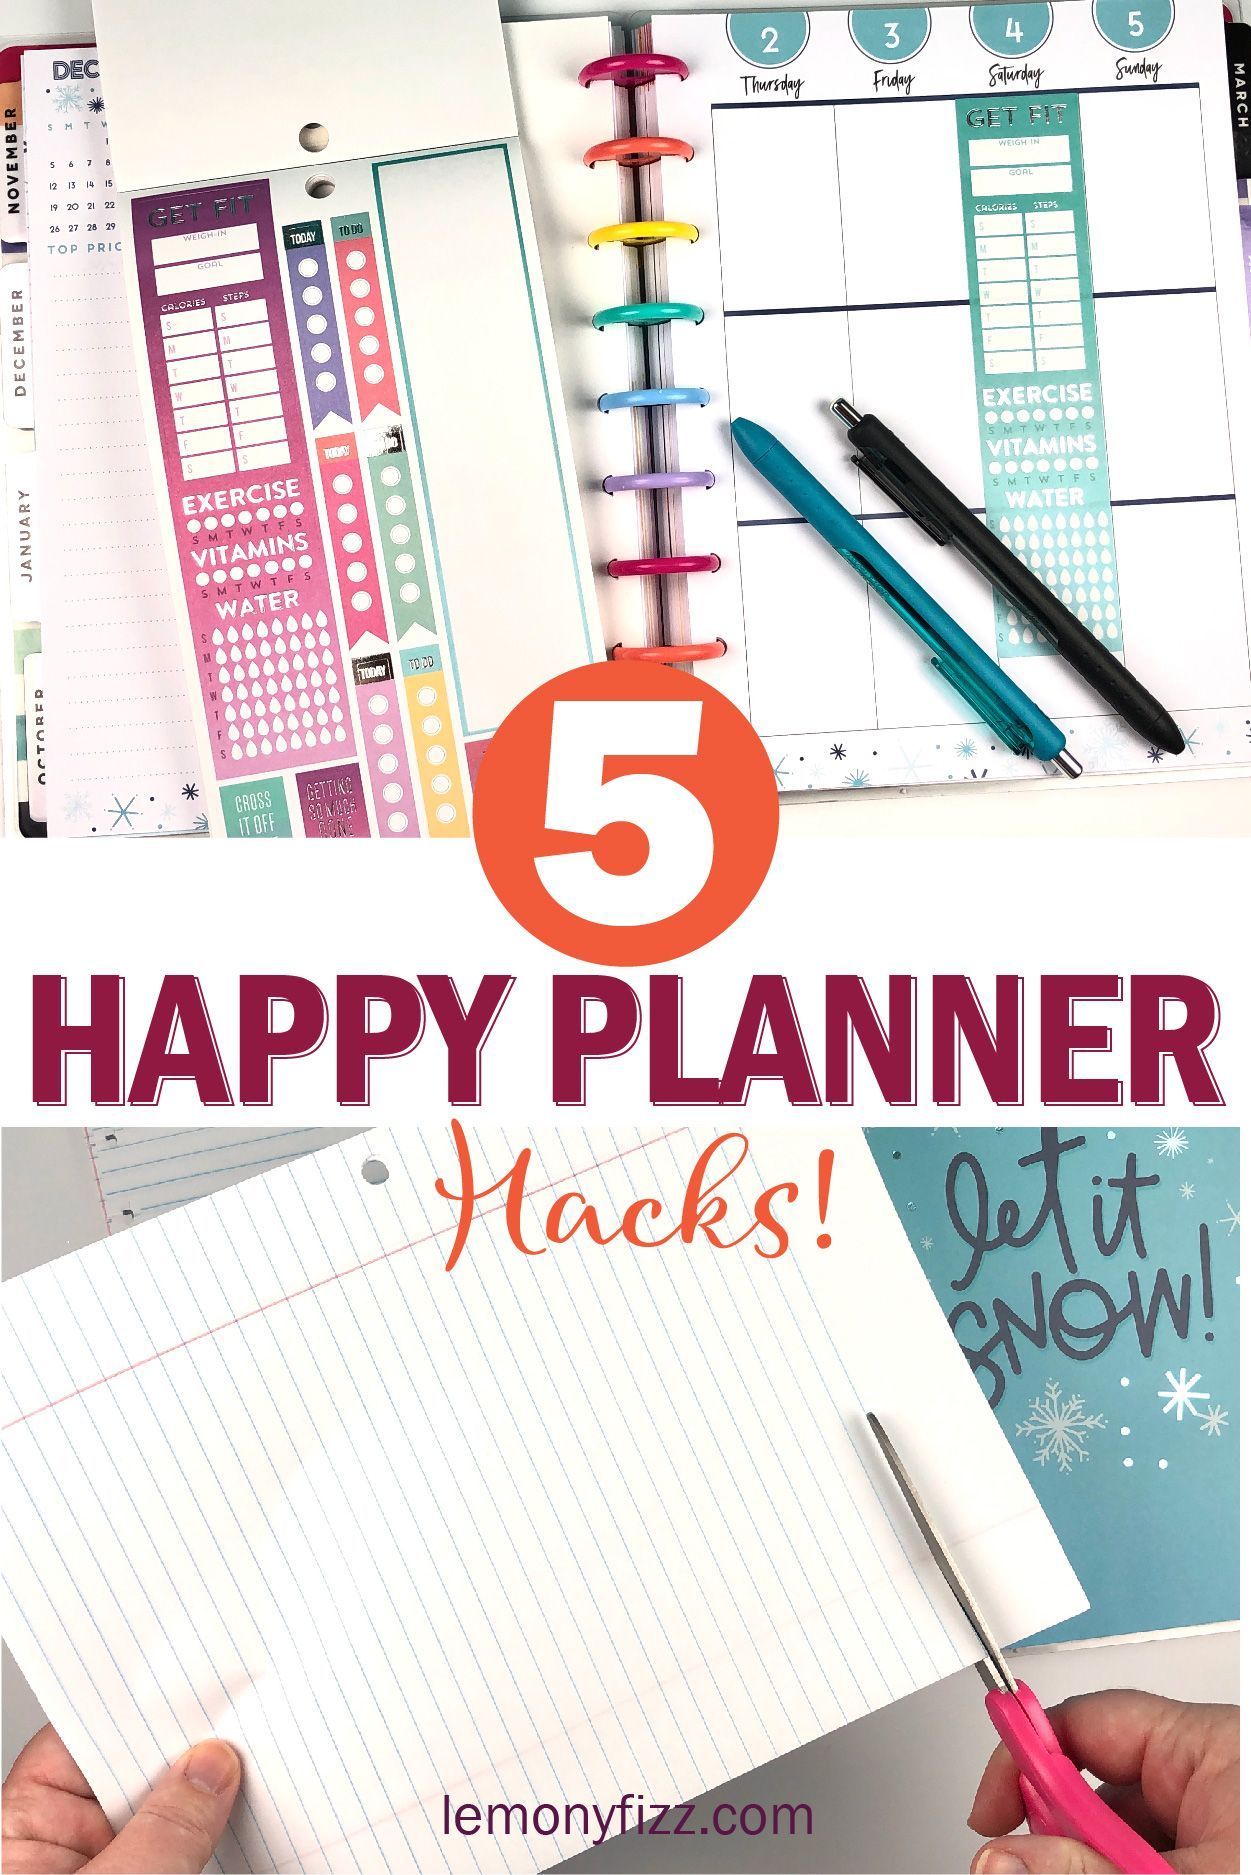 5 Happy Planner Hacks and Ideas -   17 fitness Planner ideas